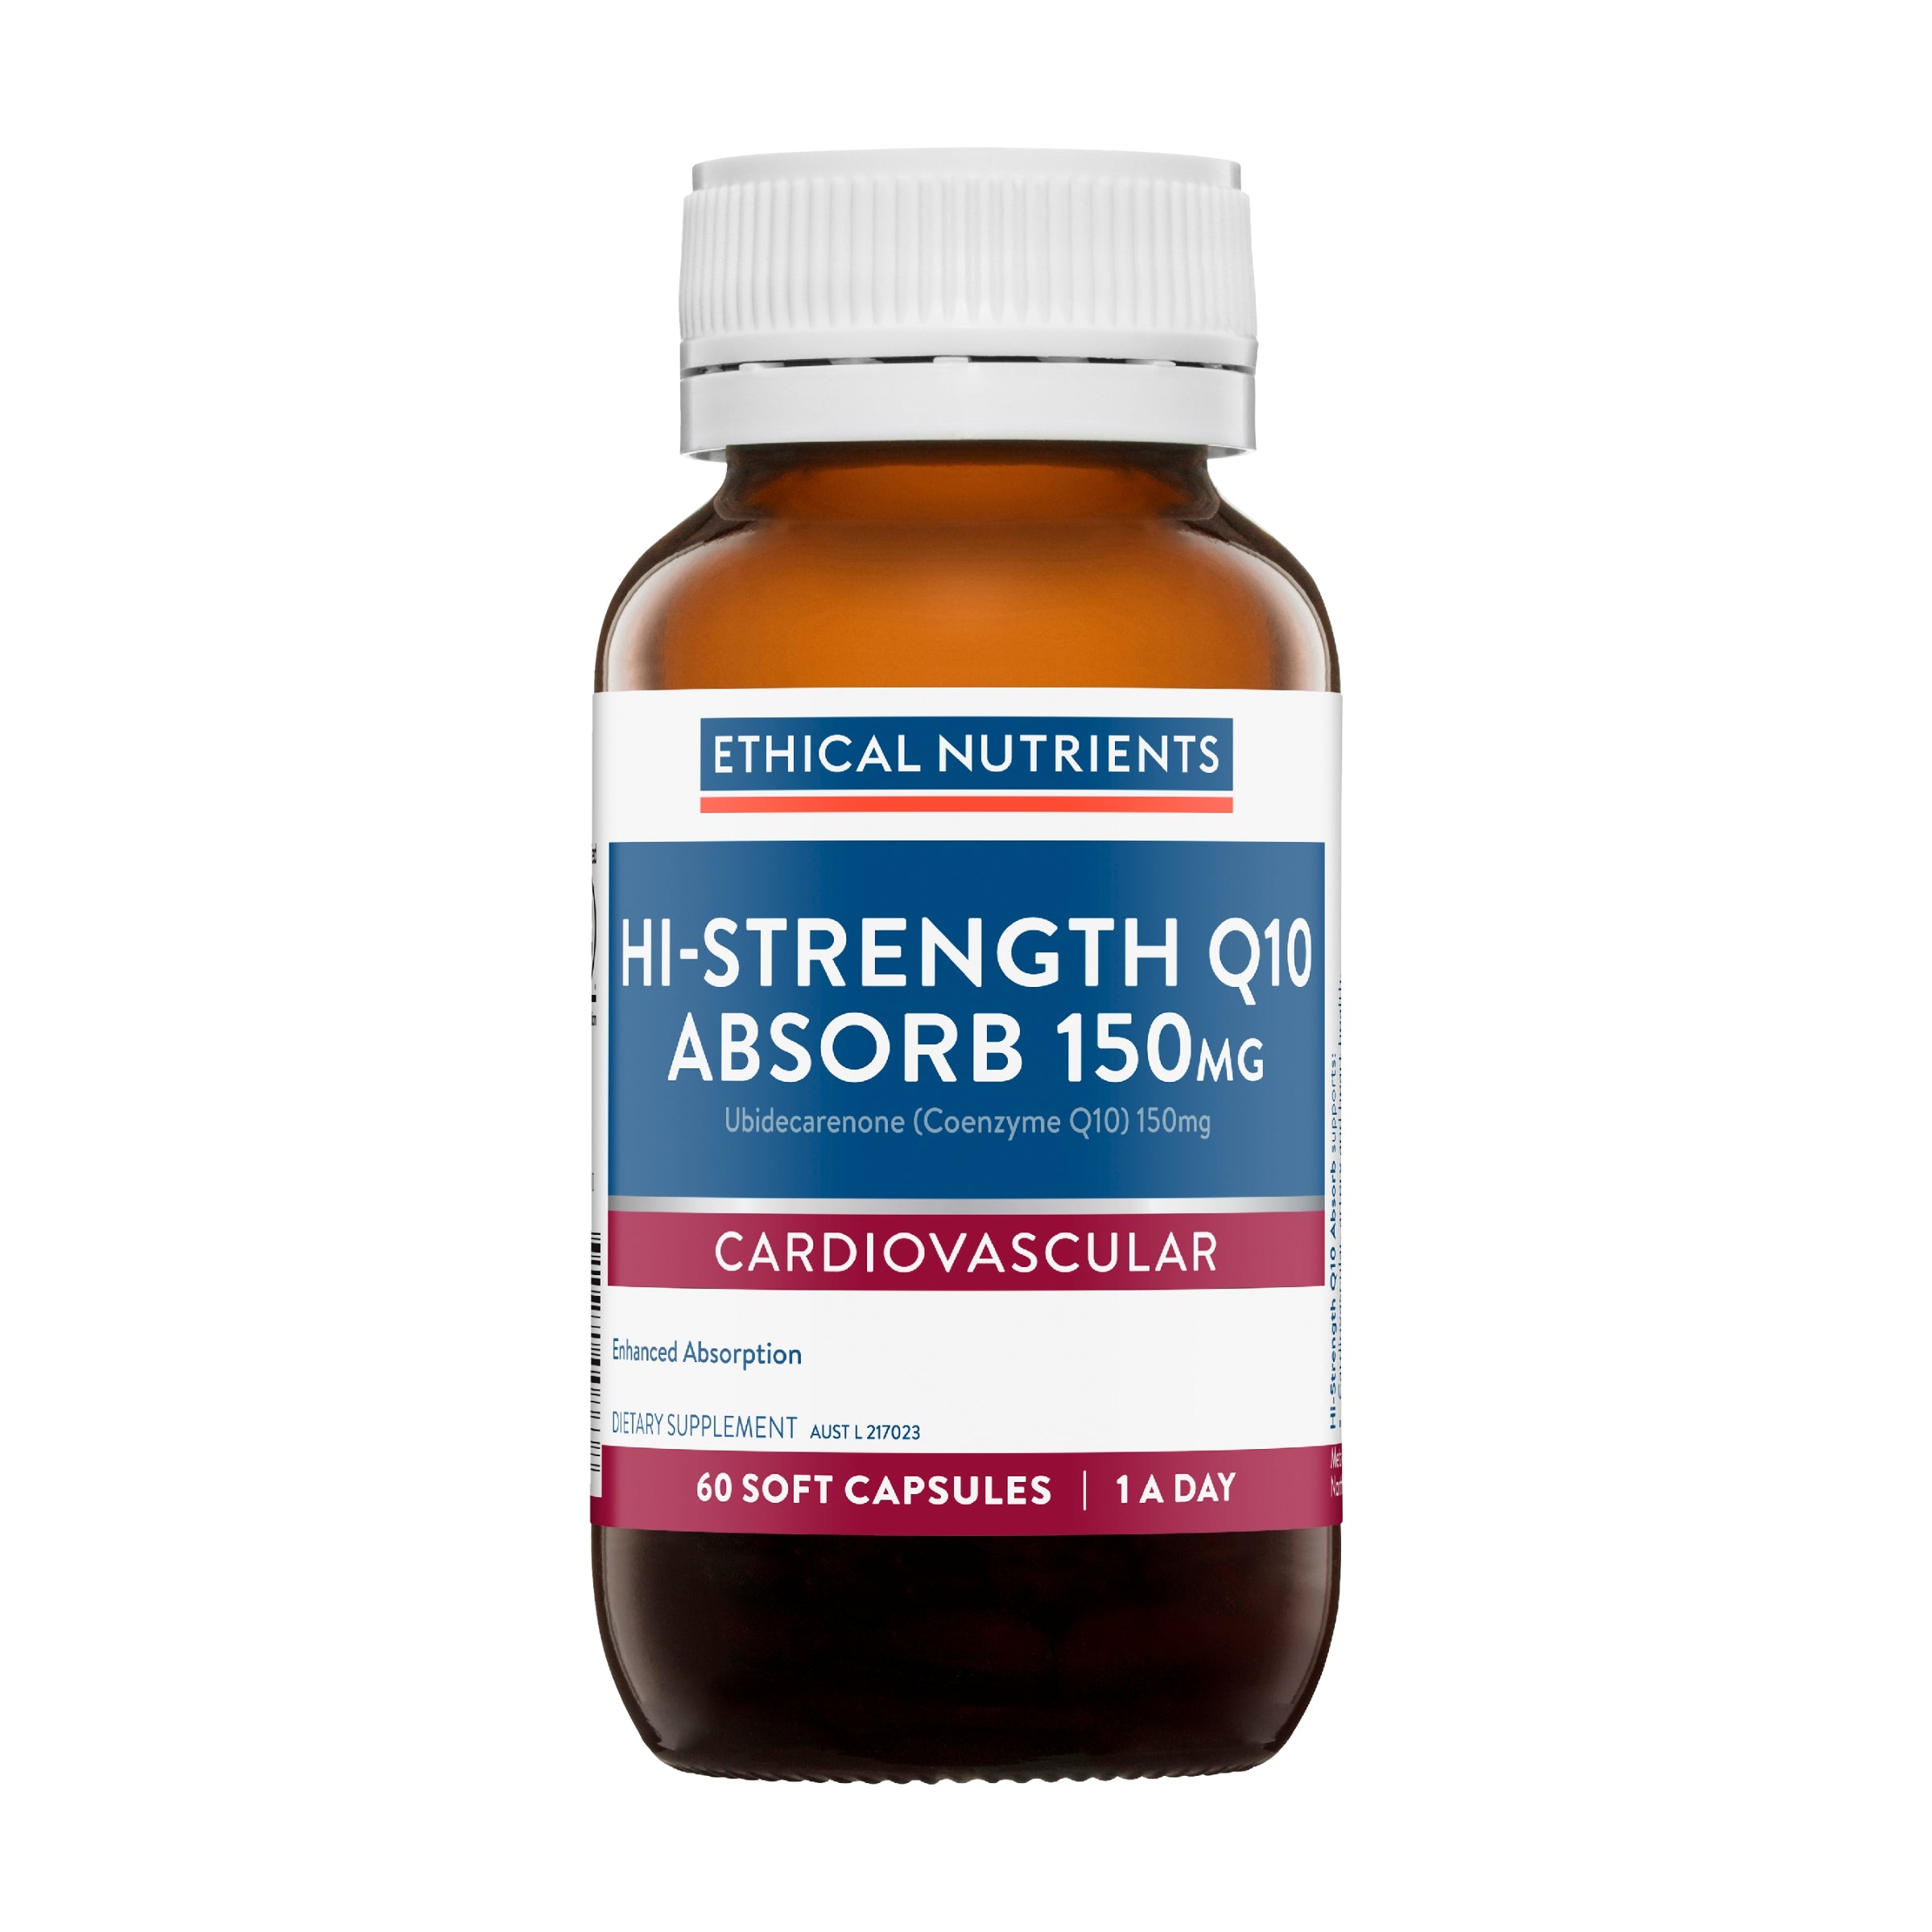 Ethical Nutrients Hi-Strength Q10 Absorb 150mg 60 Capsules #size_60 soft capsules